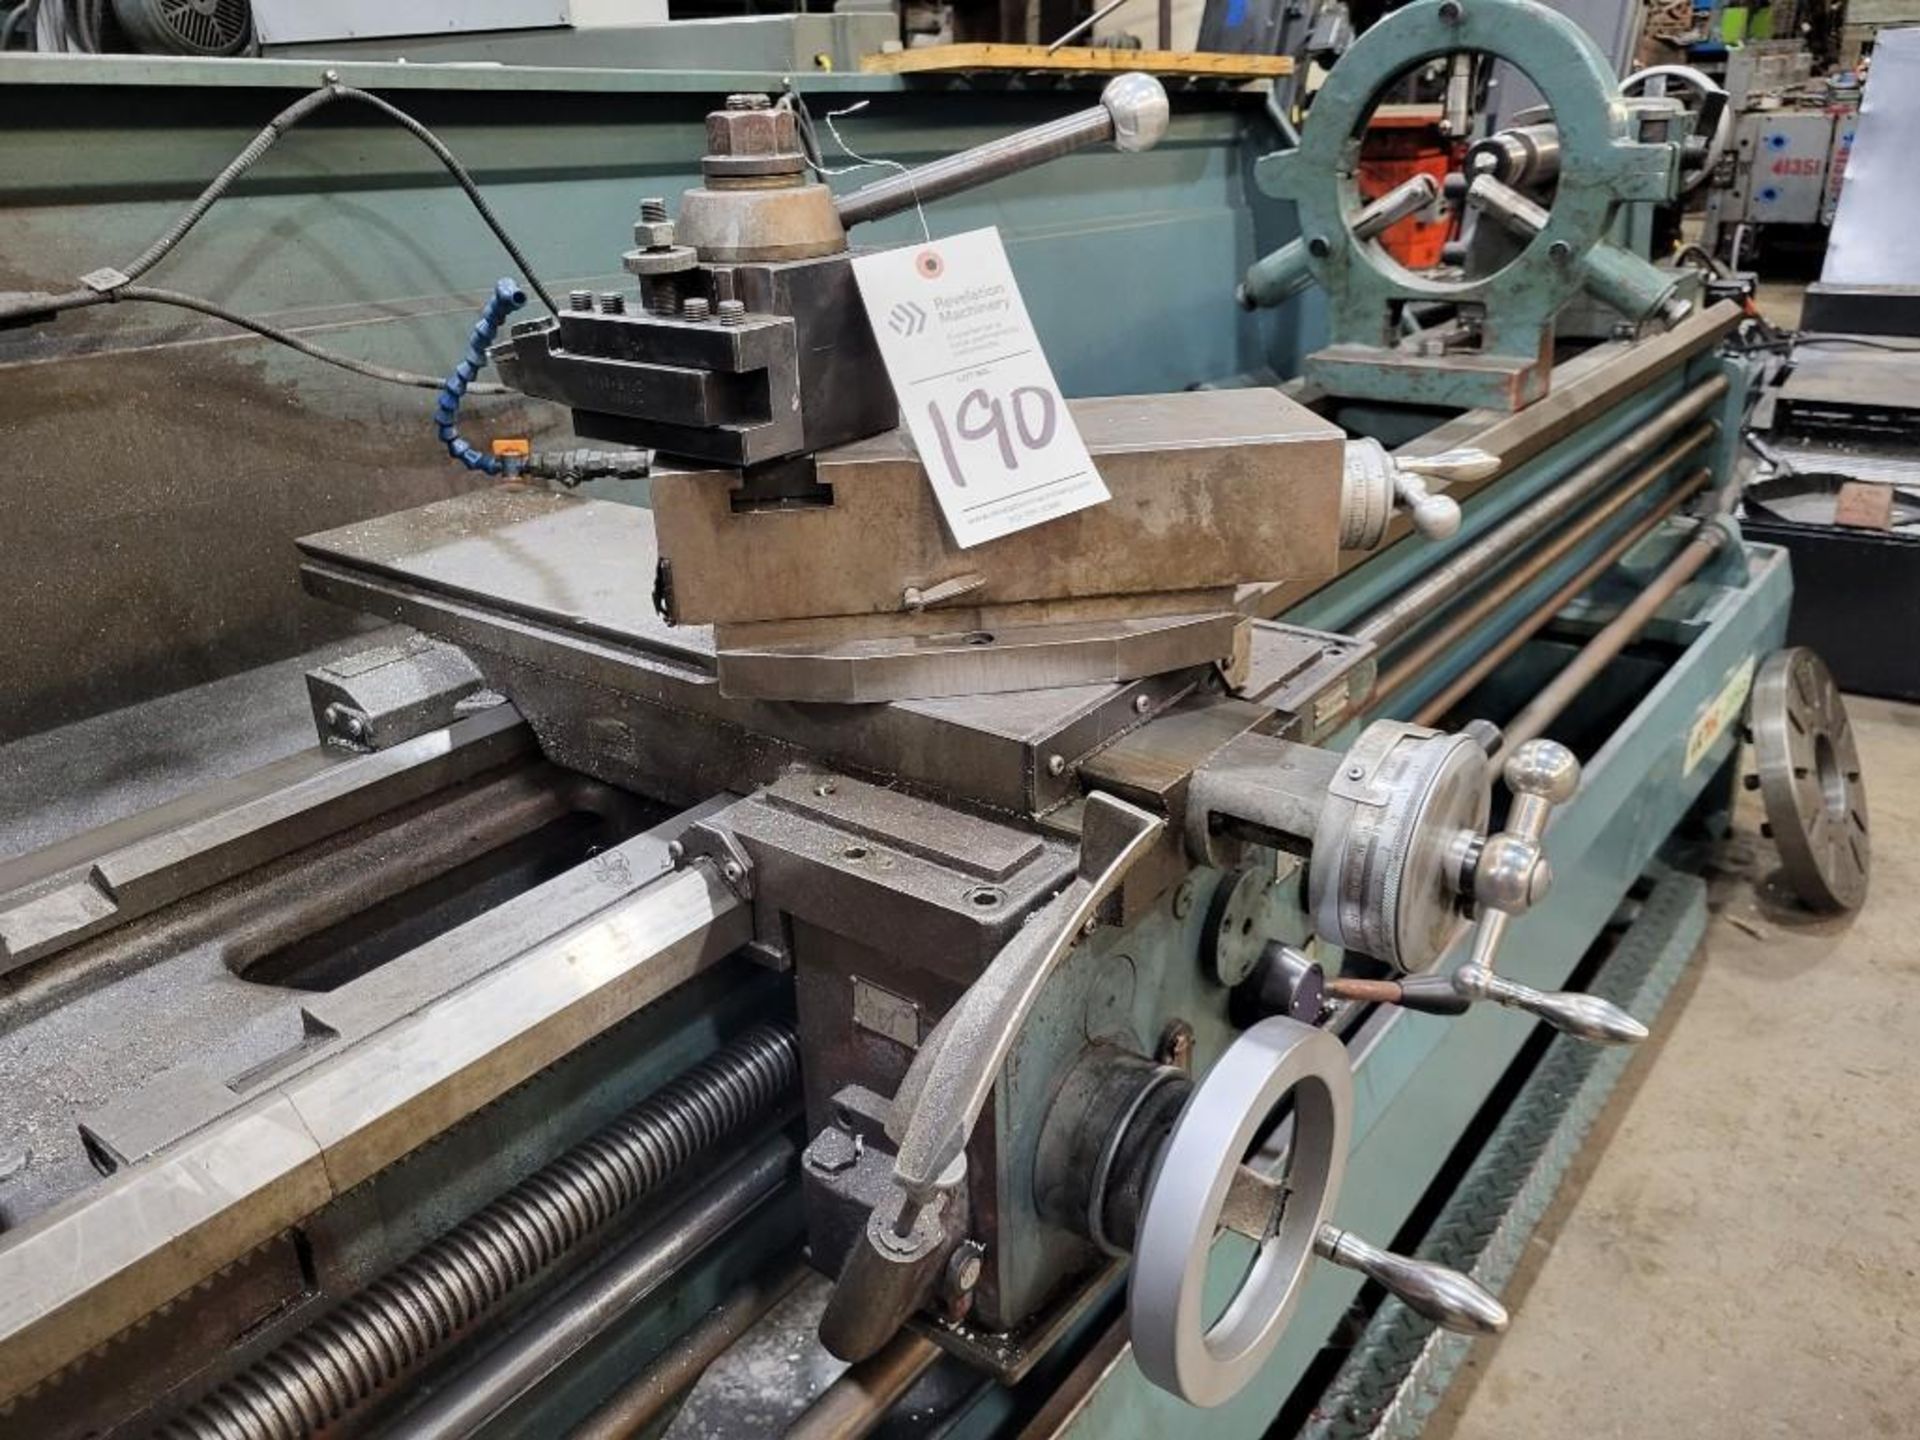 VICTOR 2080S 20" X 80" GAP BED PRECISION LATHE, WITH TAILSTOCK, CHUCK, STEADY REST, TOOLING - Image 15 of 28